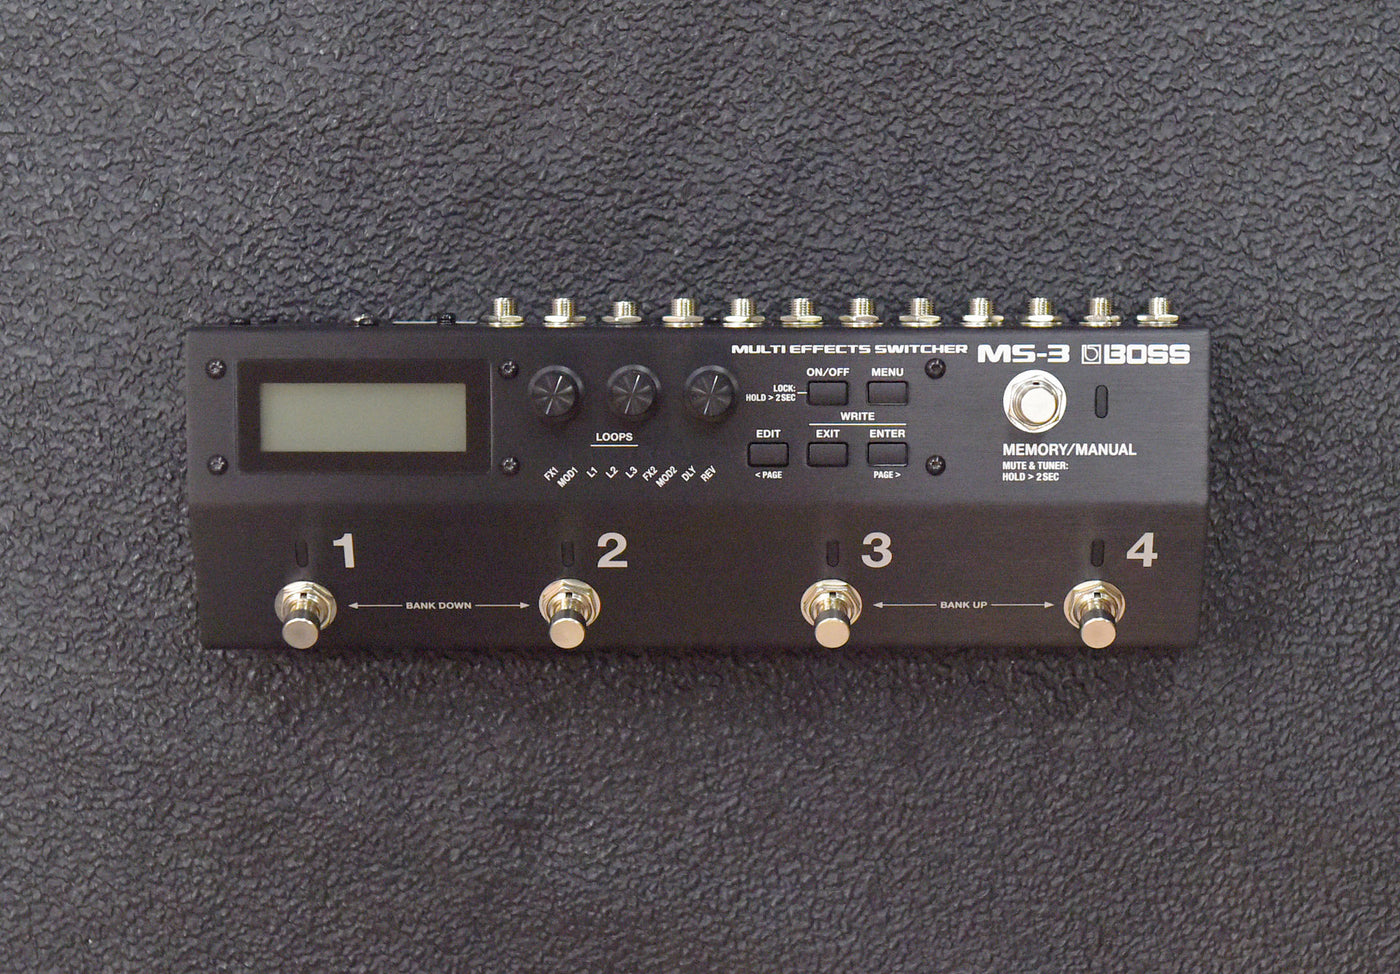 MS-3 Effects Switcher